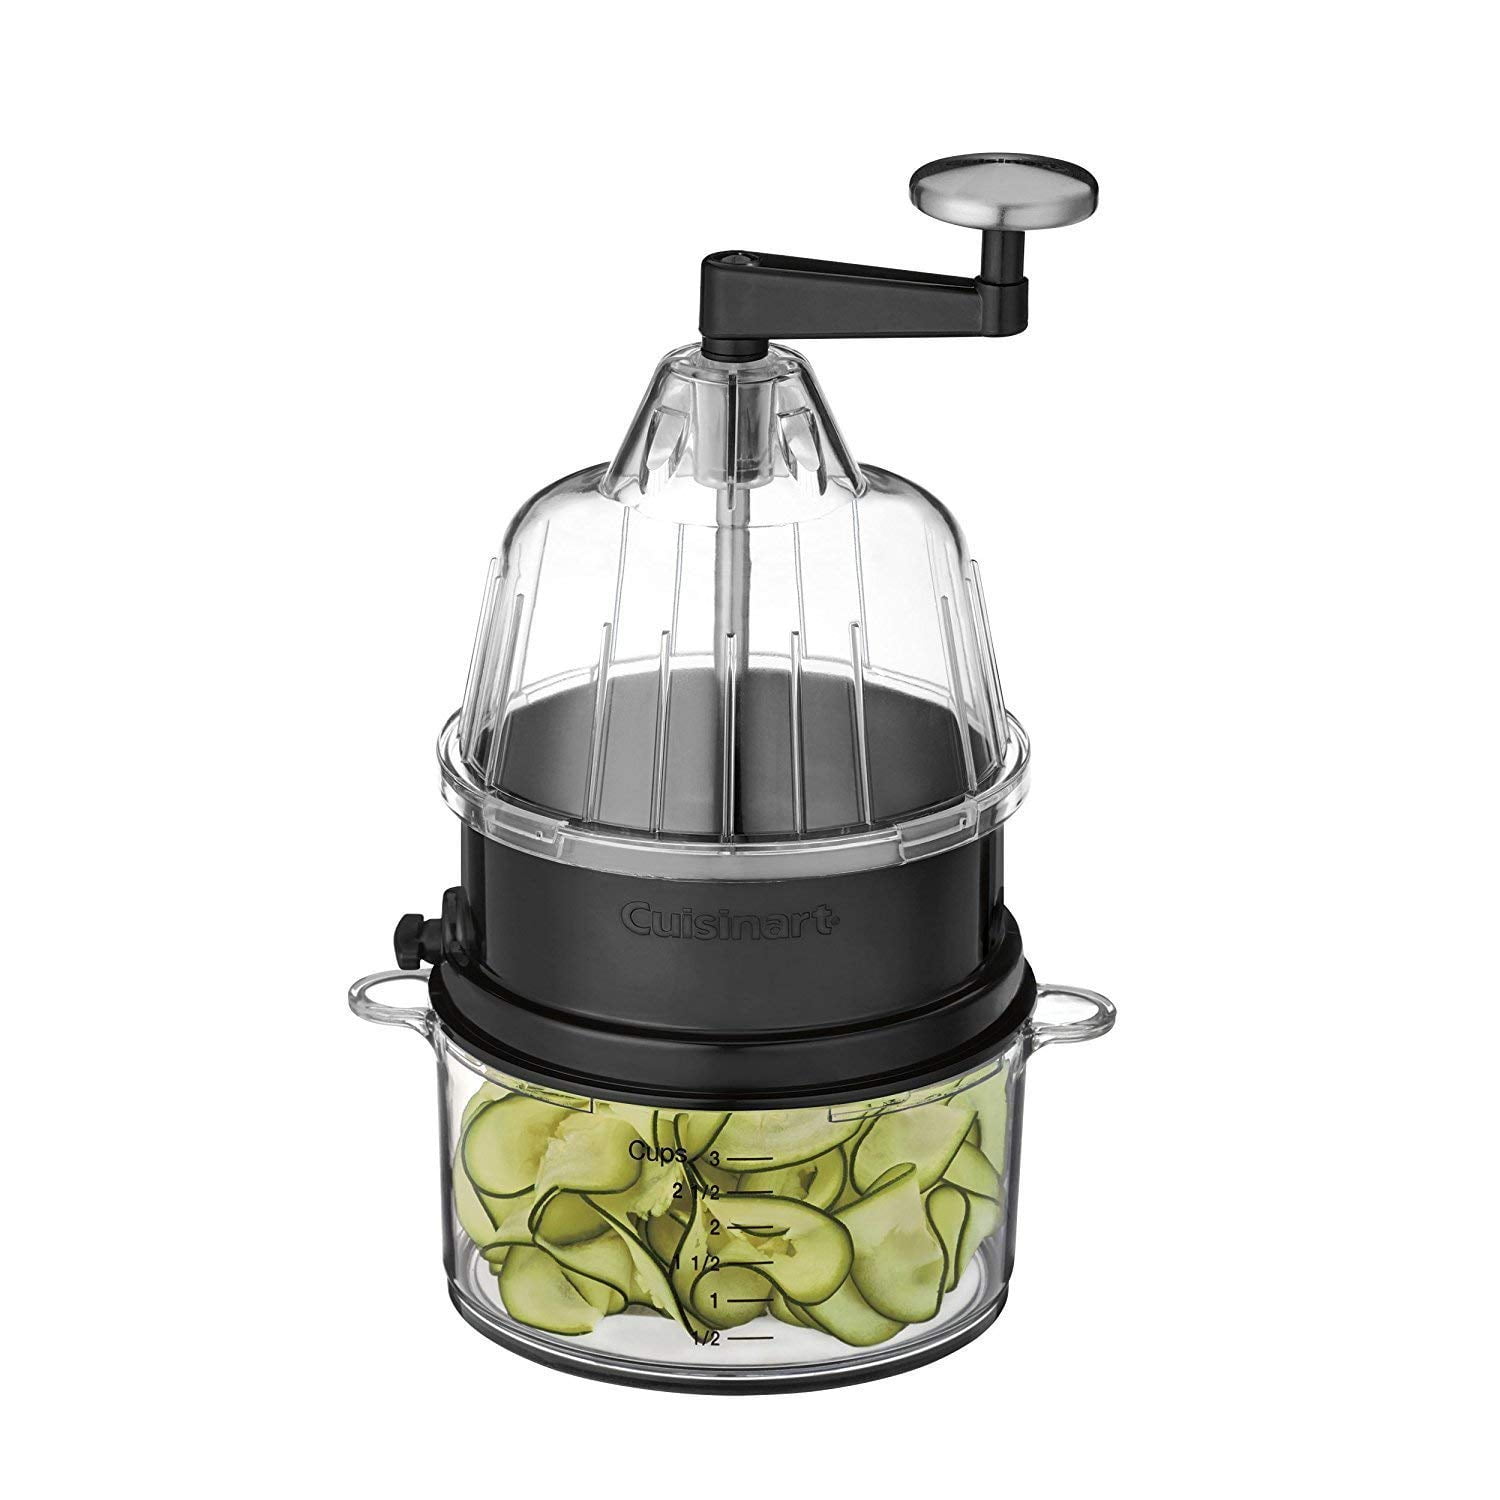 Kitexpert Vegetable Spiralizer With 4-in-1 Rotating Blades, Zucchini Noodle  Maker with Strong Suction Cup, Zoodles for Veggies Noodles and Potato